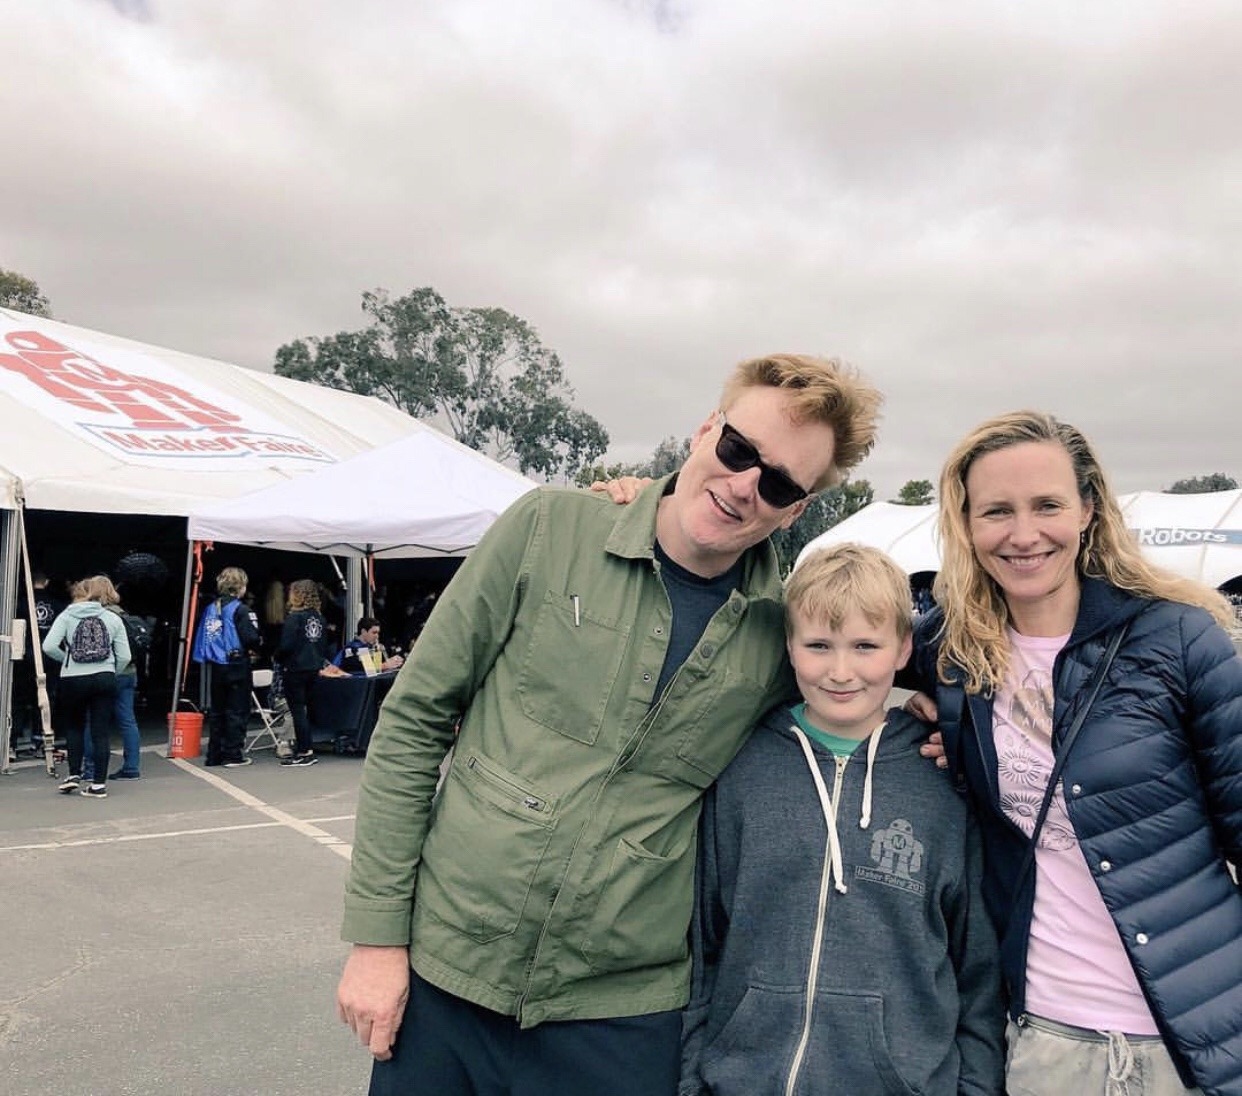 Beckett Obrien Net Worth - $163 Million, Relationship With Conan O'Brien, Parents, Cars And Much More